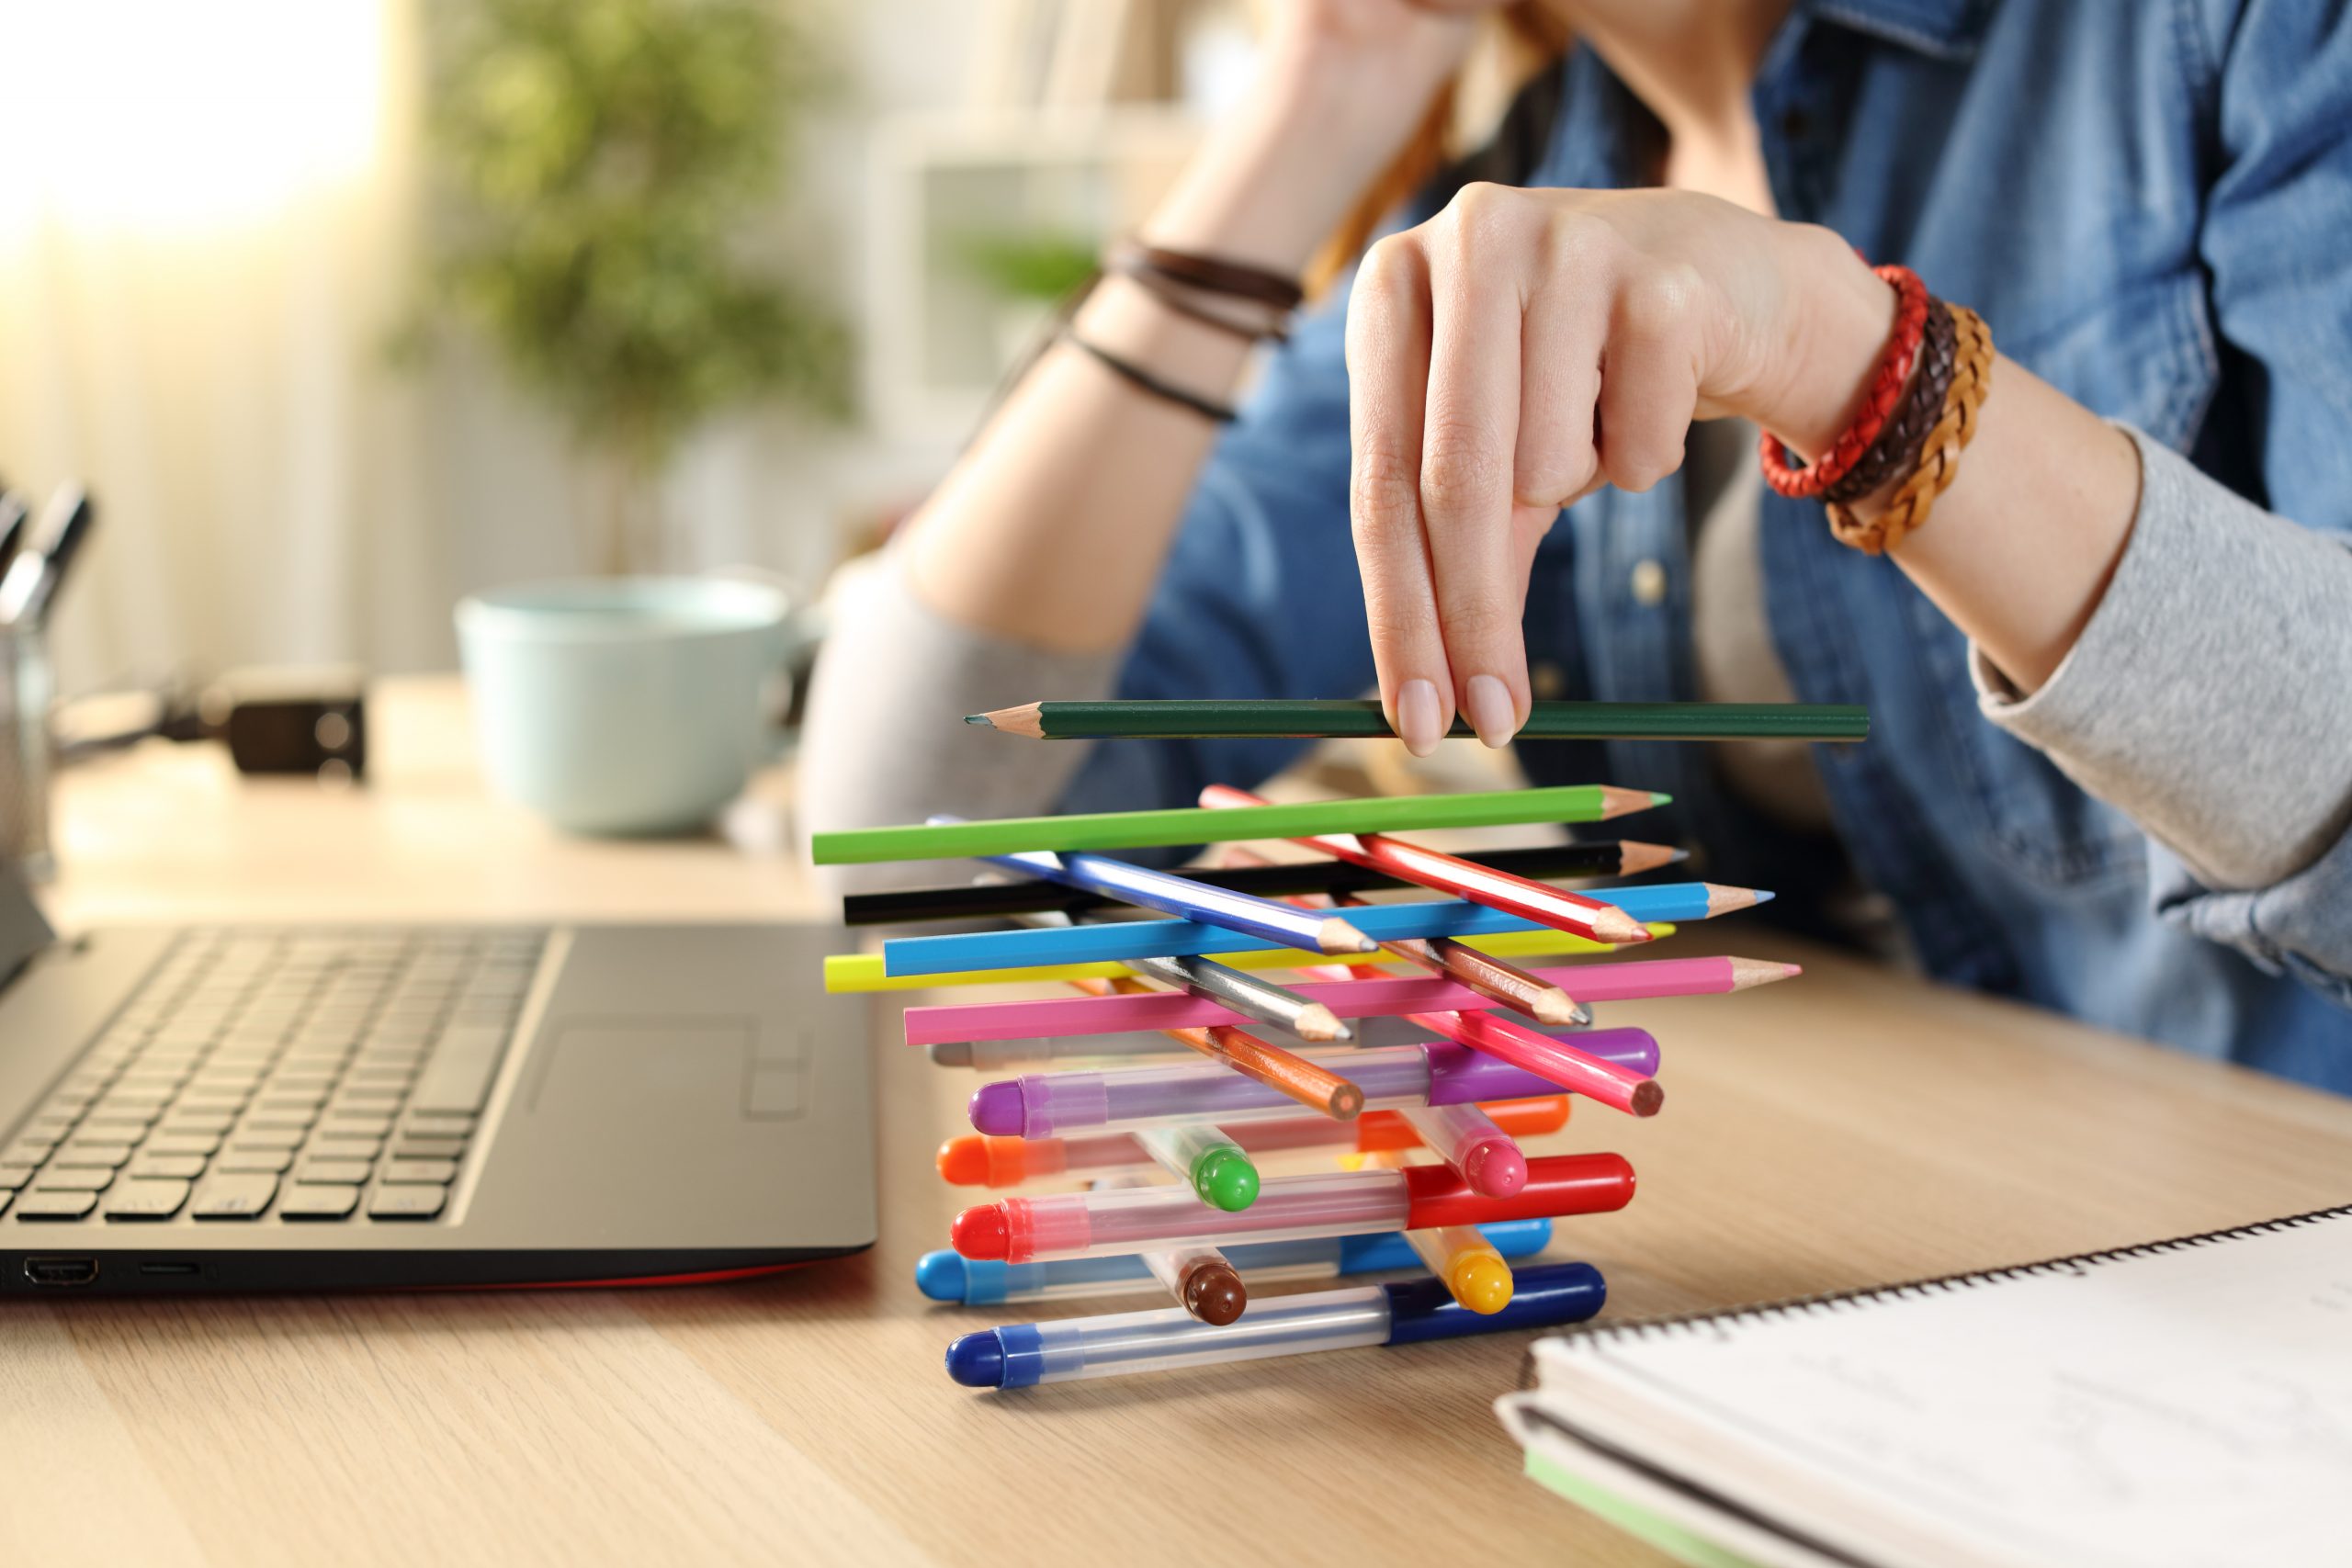 Stacking pens and delaying time on tasks they should be doing